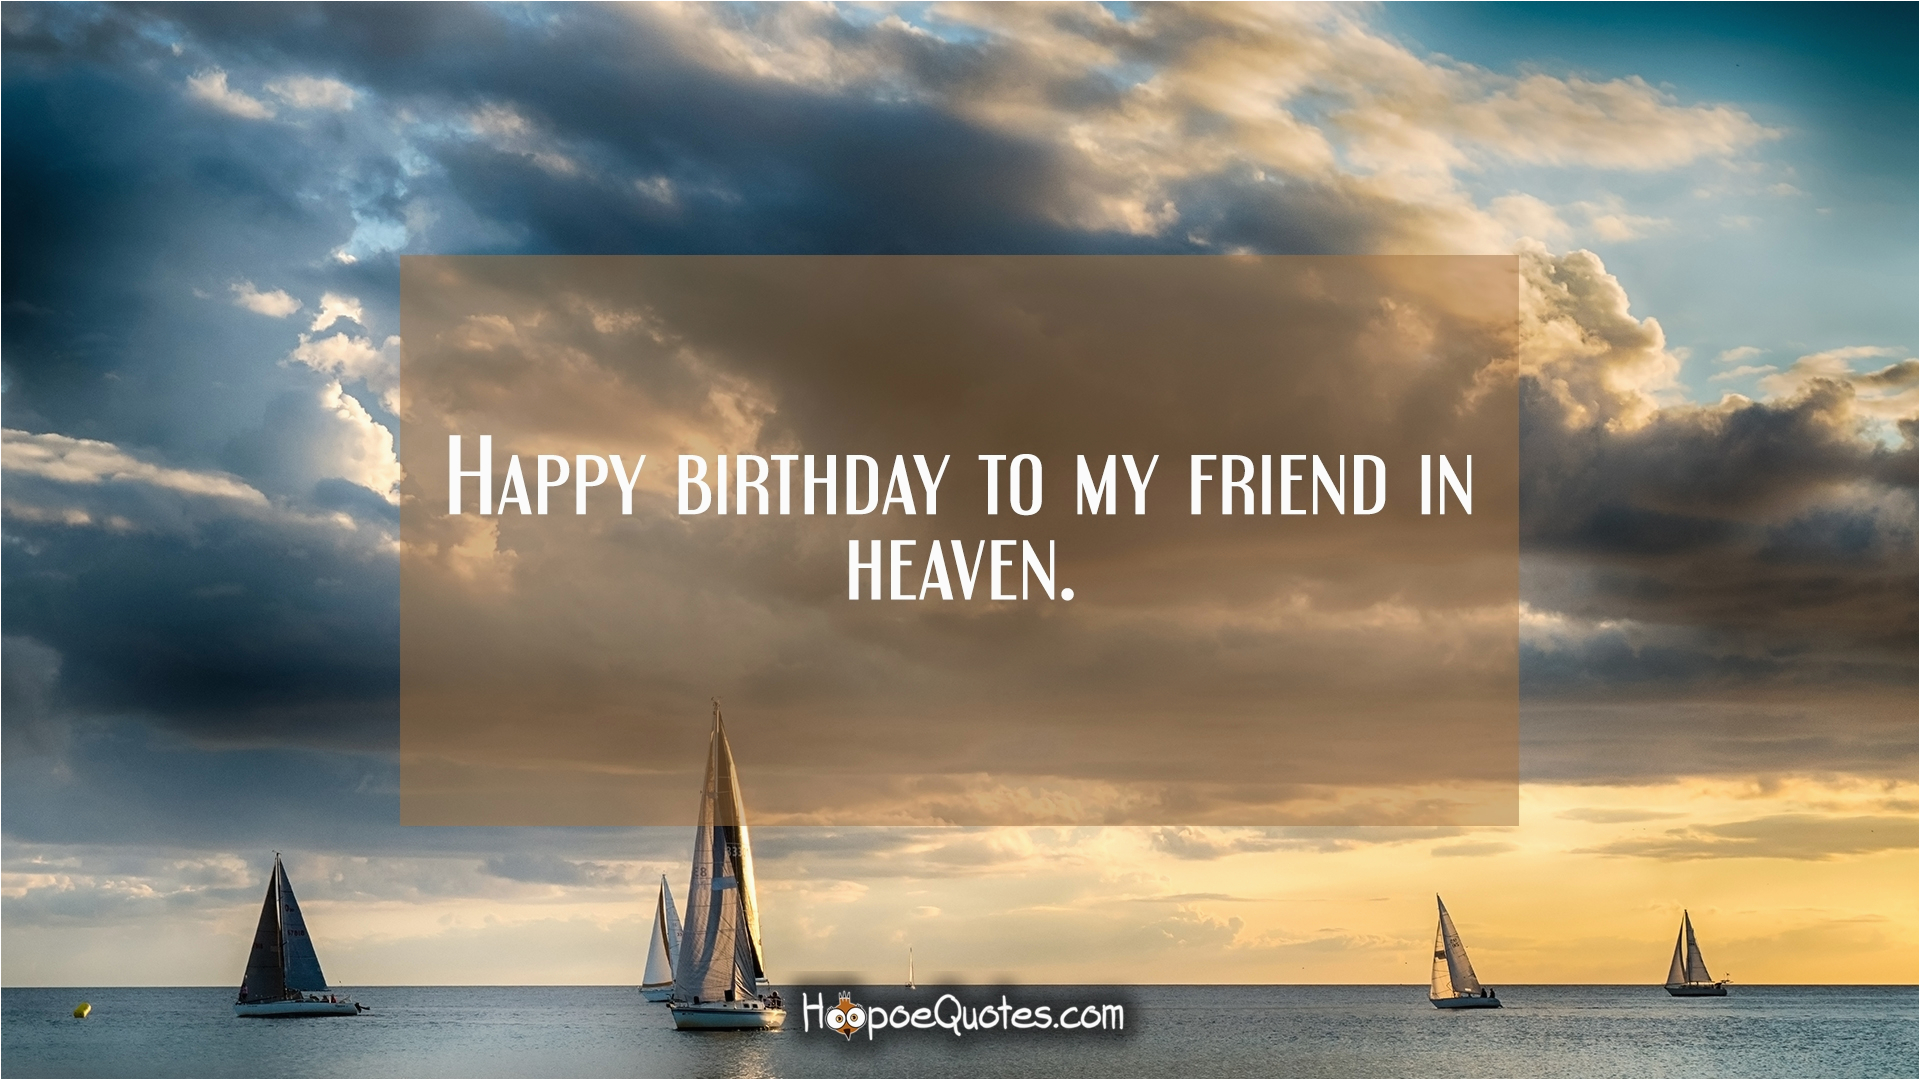 Happy Birthday to My Friend In Heaven Quotes Happy Birthday to My Friend In Heaven Hoopoequotes